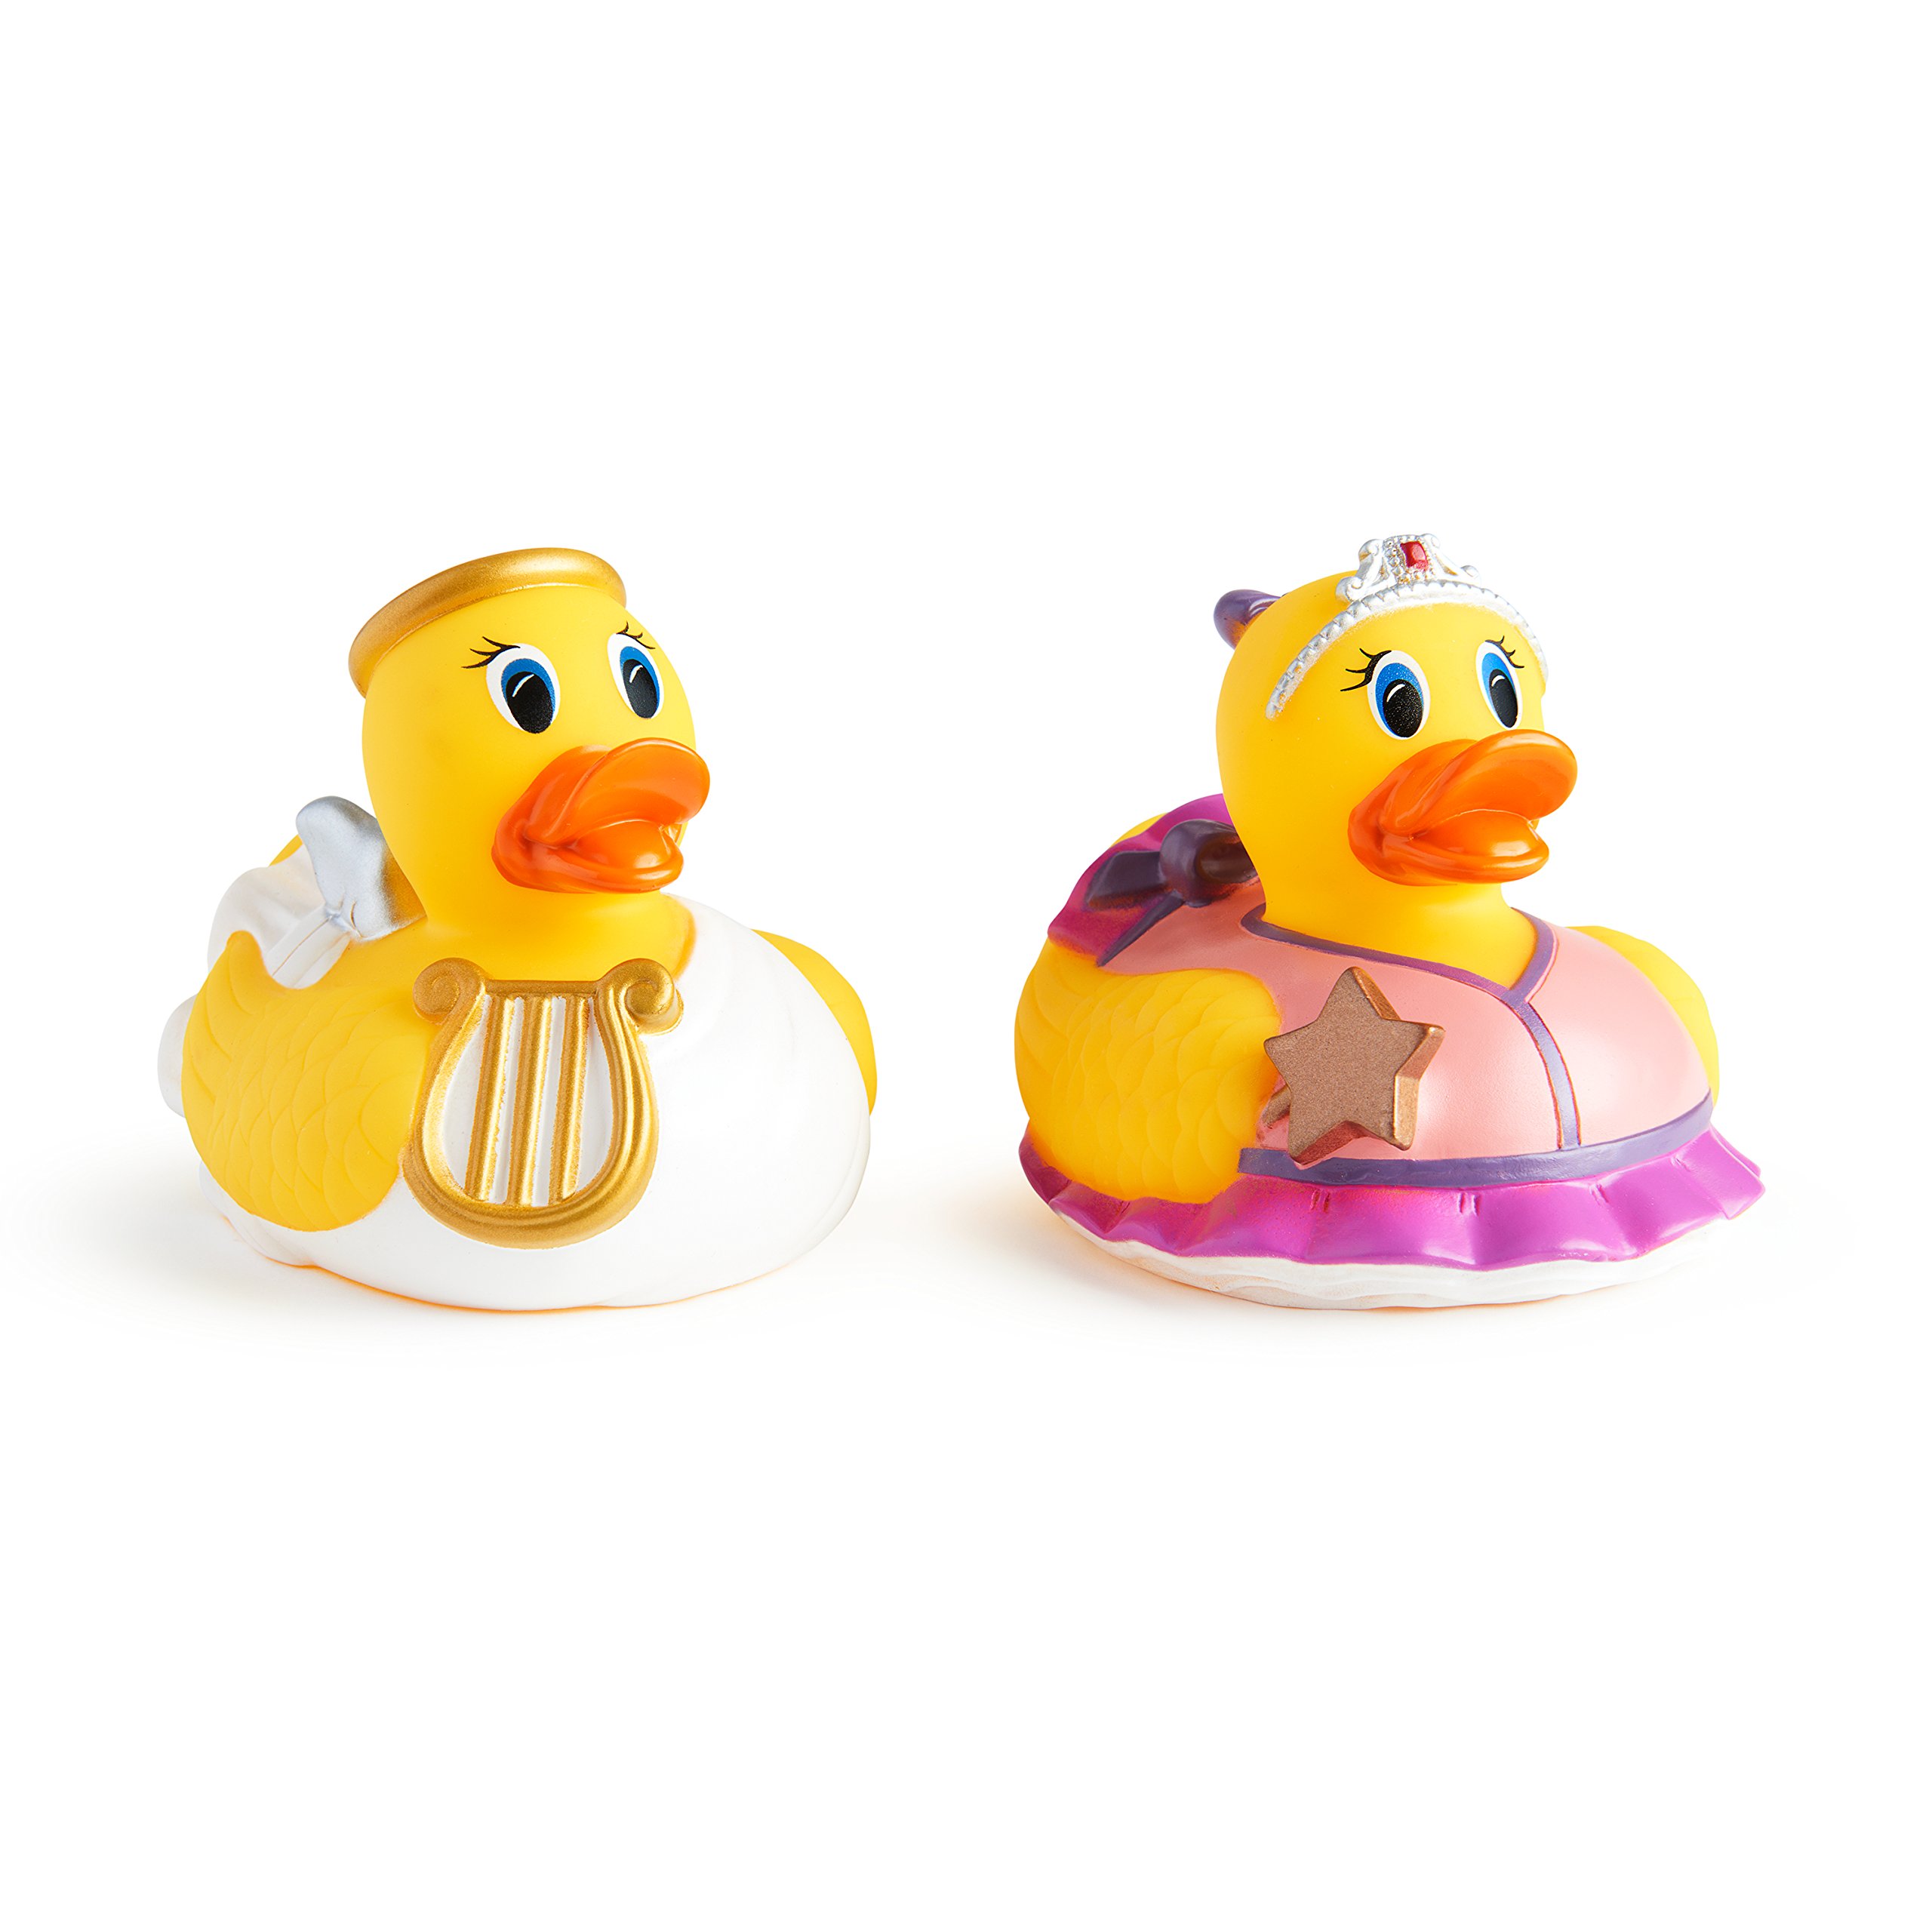 Munchkin® White Hot Super Safety Bath Ducky, Princess and Angel, 2 Count